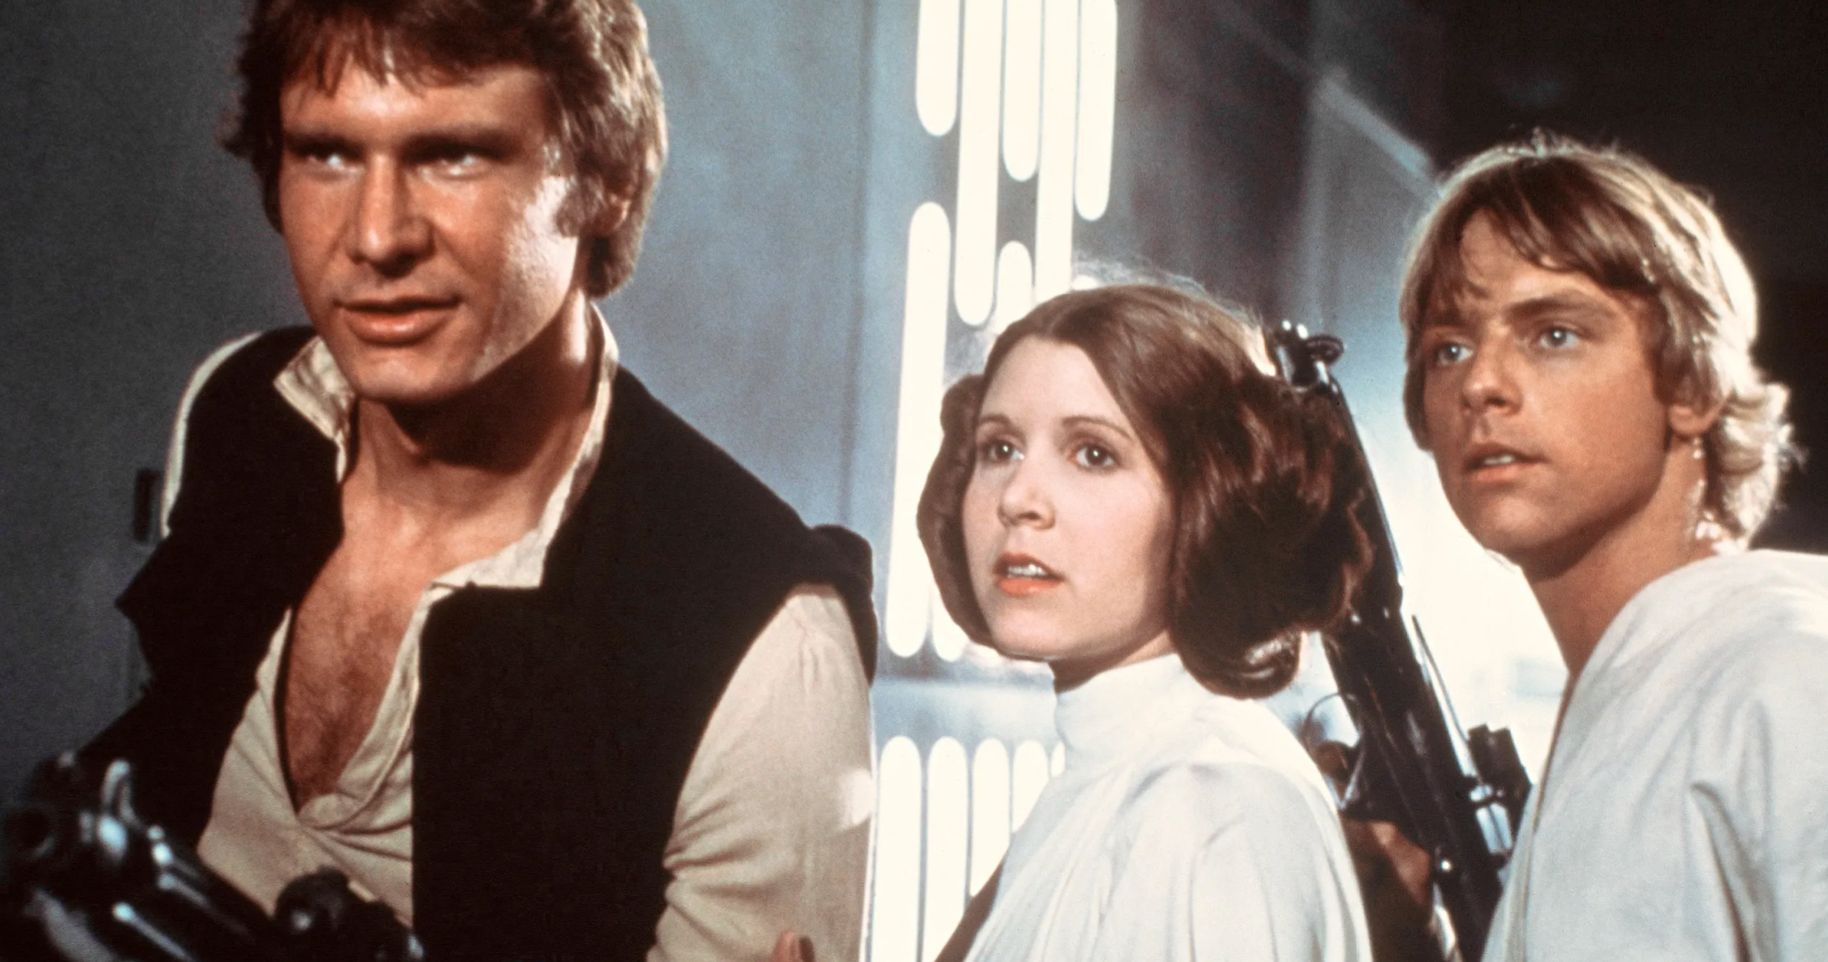 Mark Hamill Joins Star Wars Fans in Remembering Carrie Fisher on 4th Anniversary of Her Death